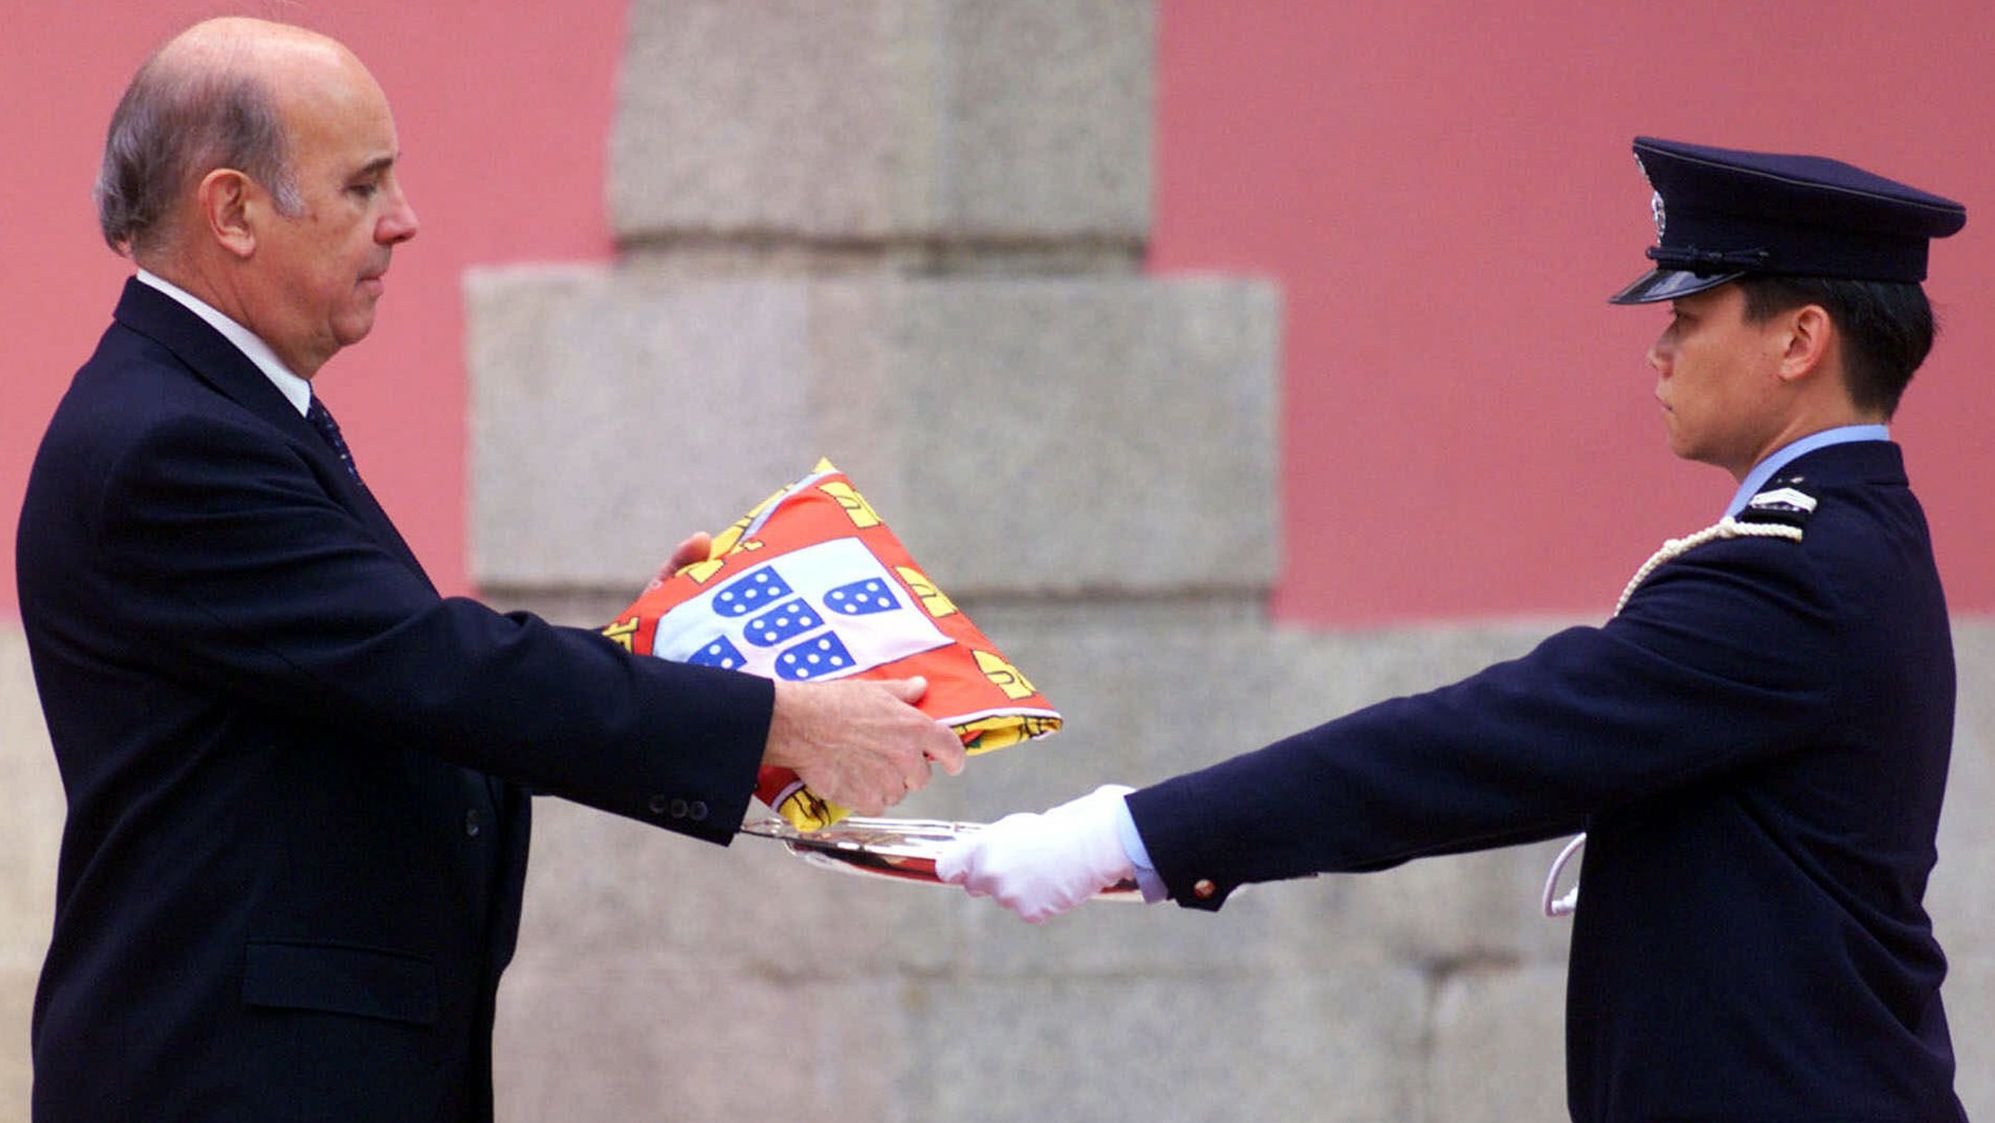 Outgoing Macao Gov. Vasco Joaquim Rocha Vieira, left, is presented with a Portuguese flag before Portugal formally handed the colony back to China in 1999, ending 442 years of colonial rule. Macao, like Hong Kong, is a special administrative region that has a separate governing system from mainland China. It was Europe's oldest and last colony in Asia.